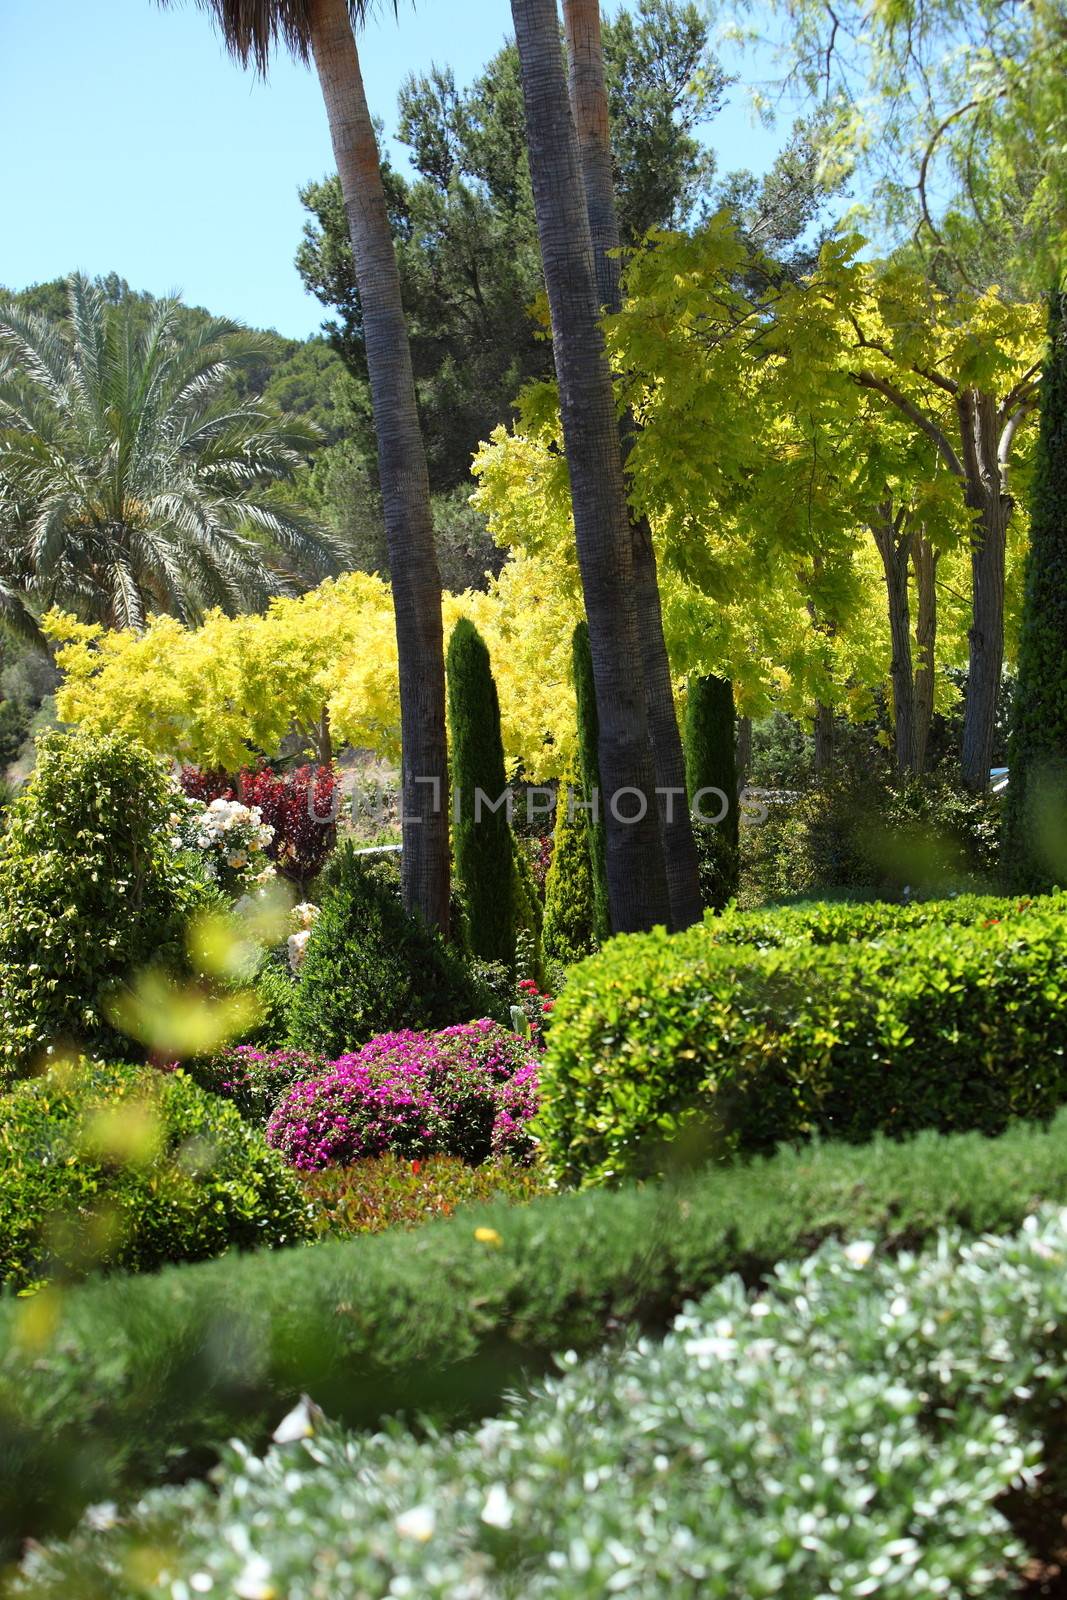 Lush tropical garden with palm trees, cypresses and mature flowering shrubs